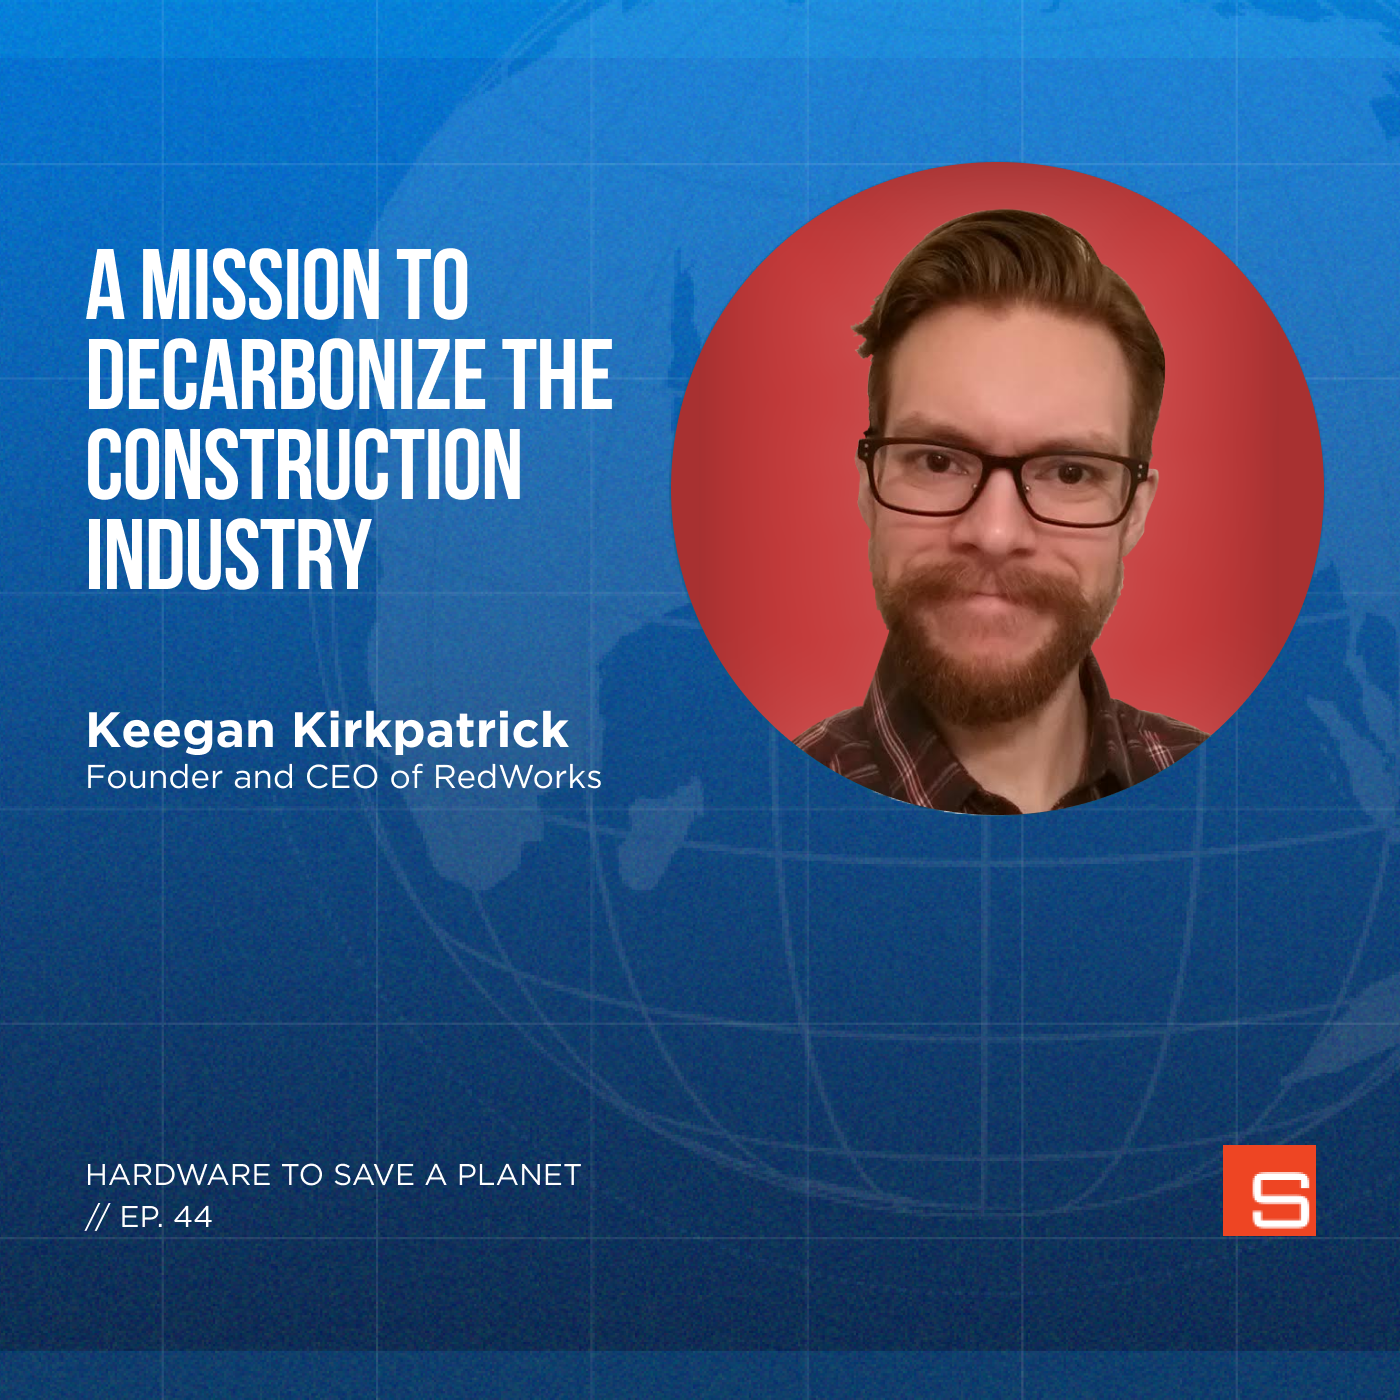 A Mission to Decarbonize the Construction Industry with Keegan Kirkpatrick, Founder and CEO of RedWorks